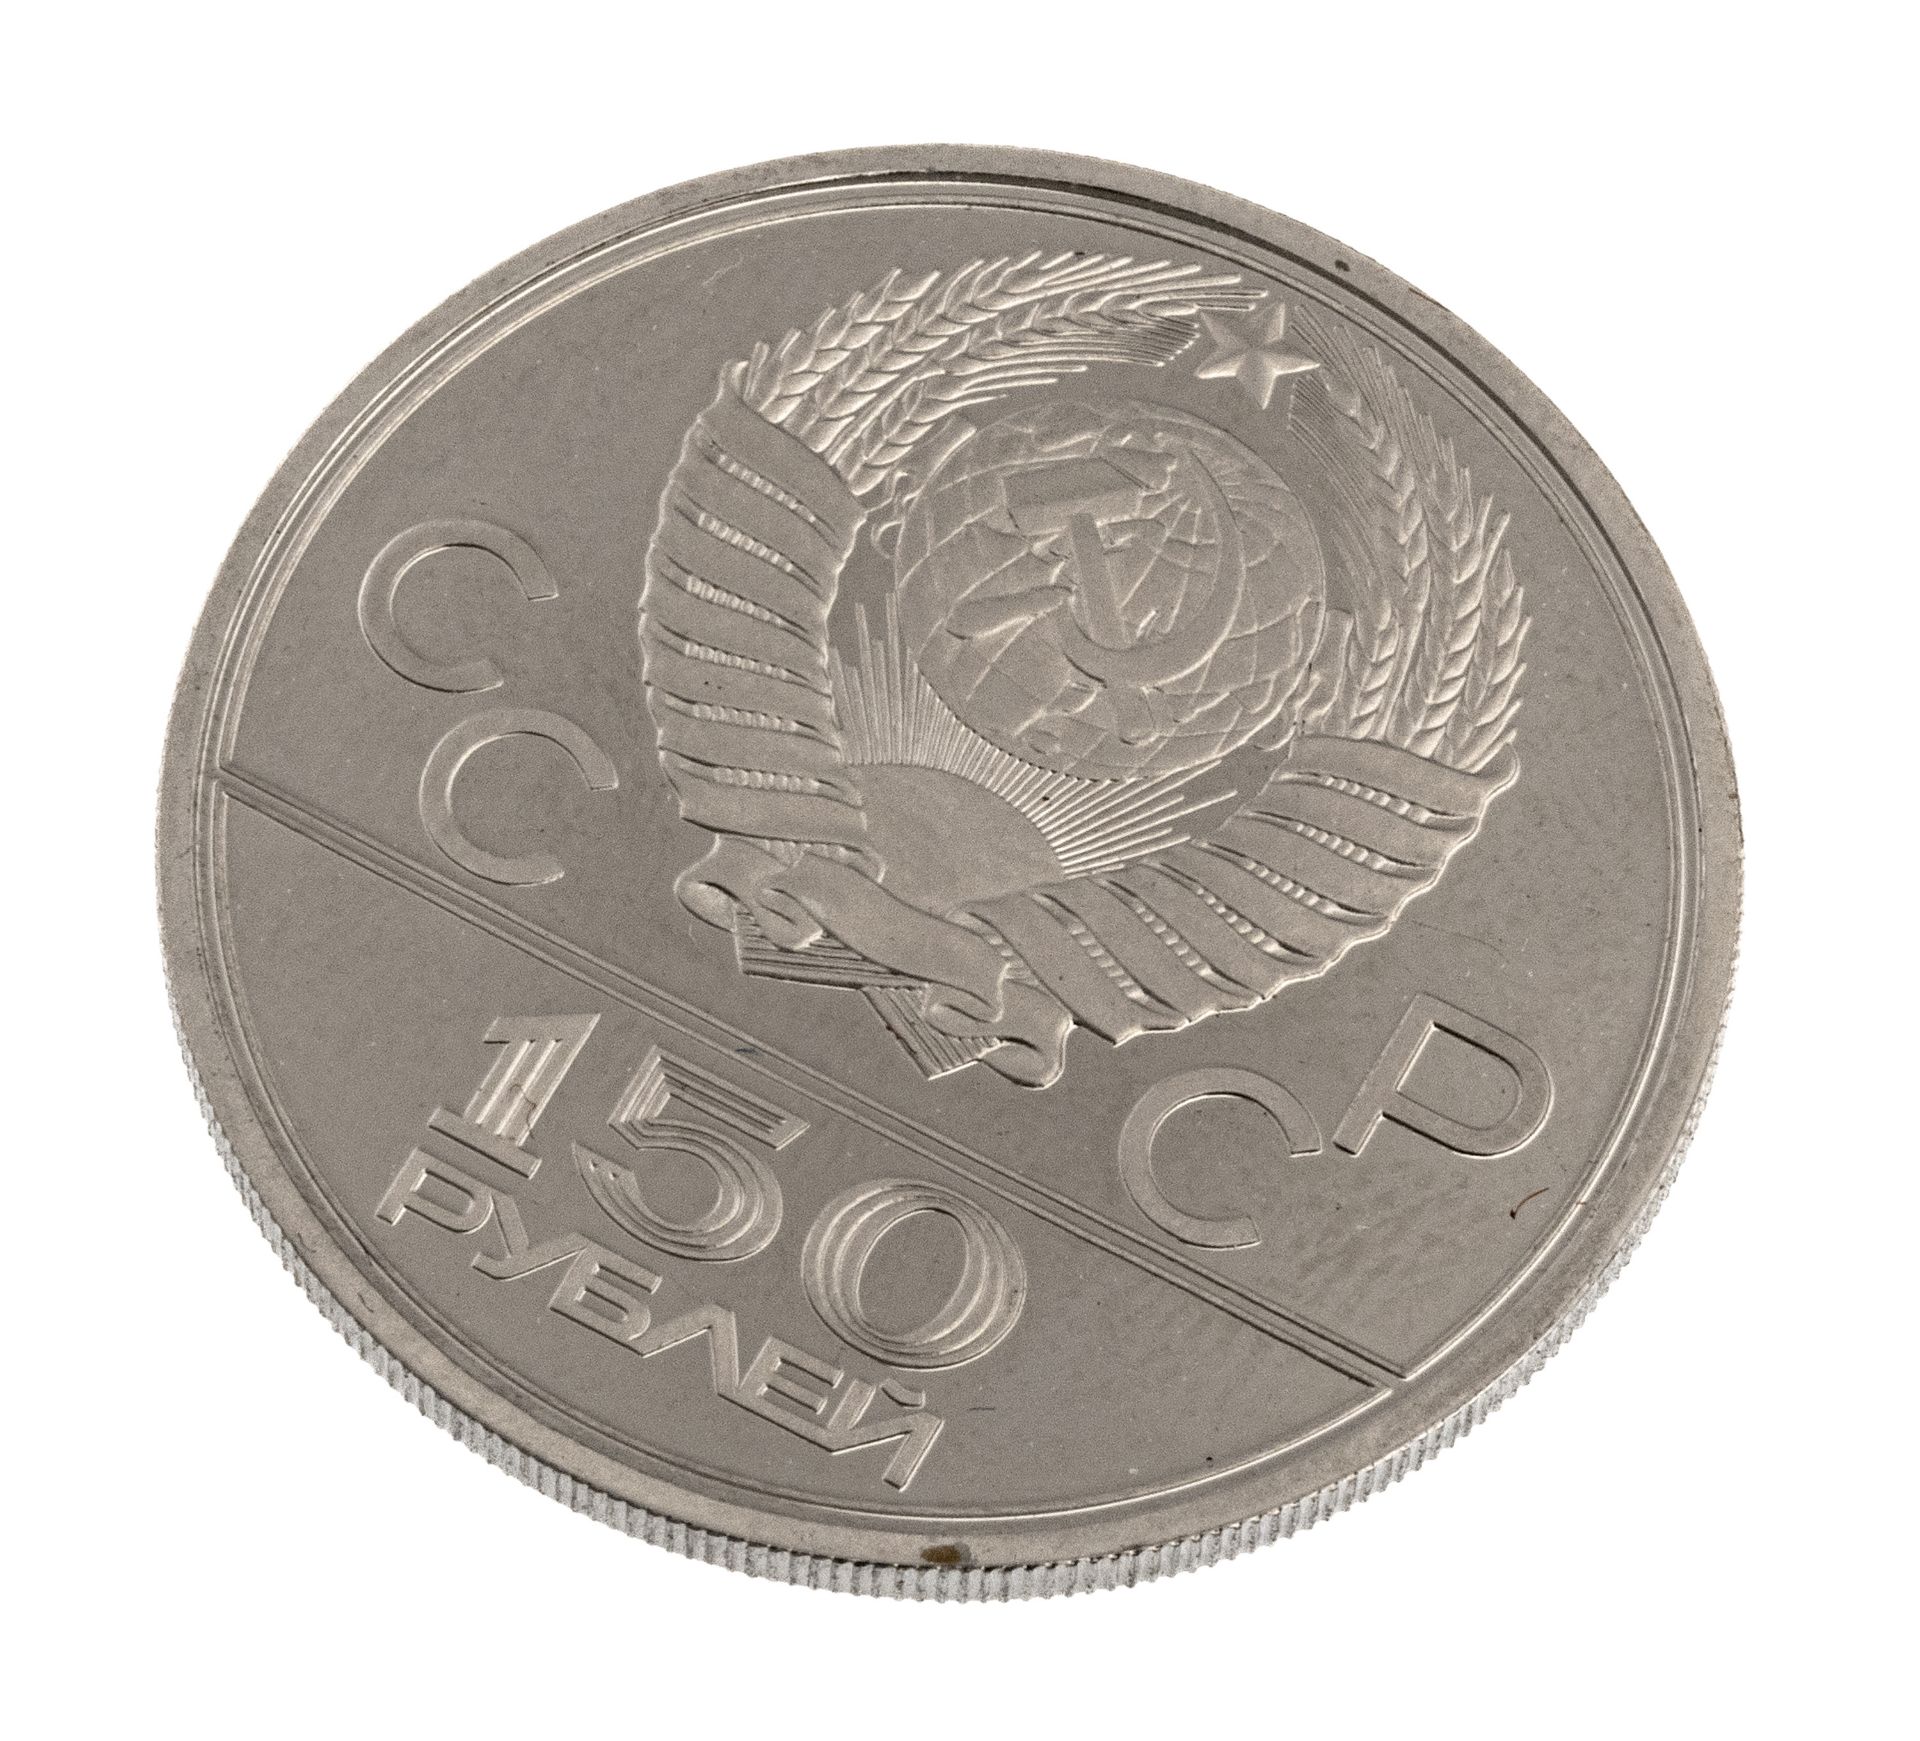 PLATINUM MEDAL MOSCOW OLYMPICS 1980